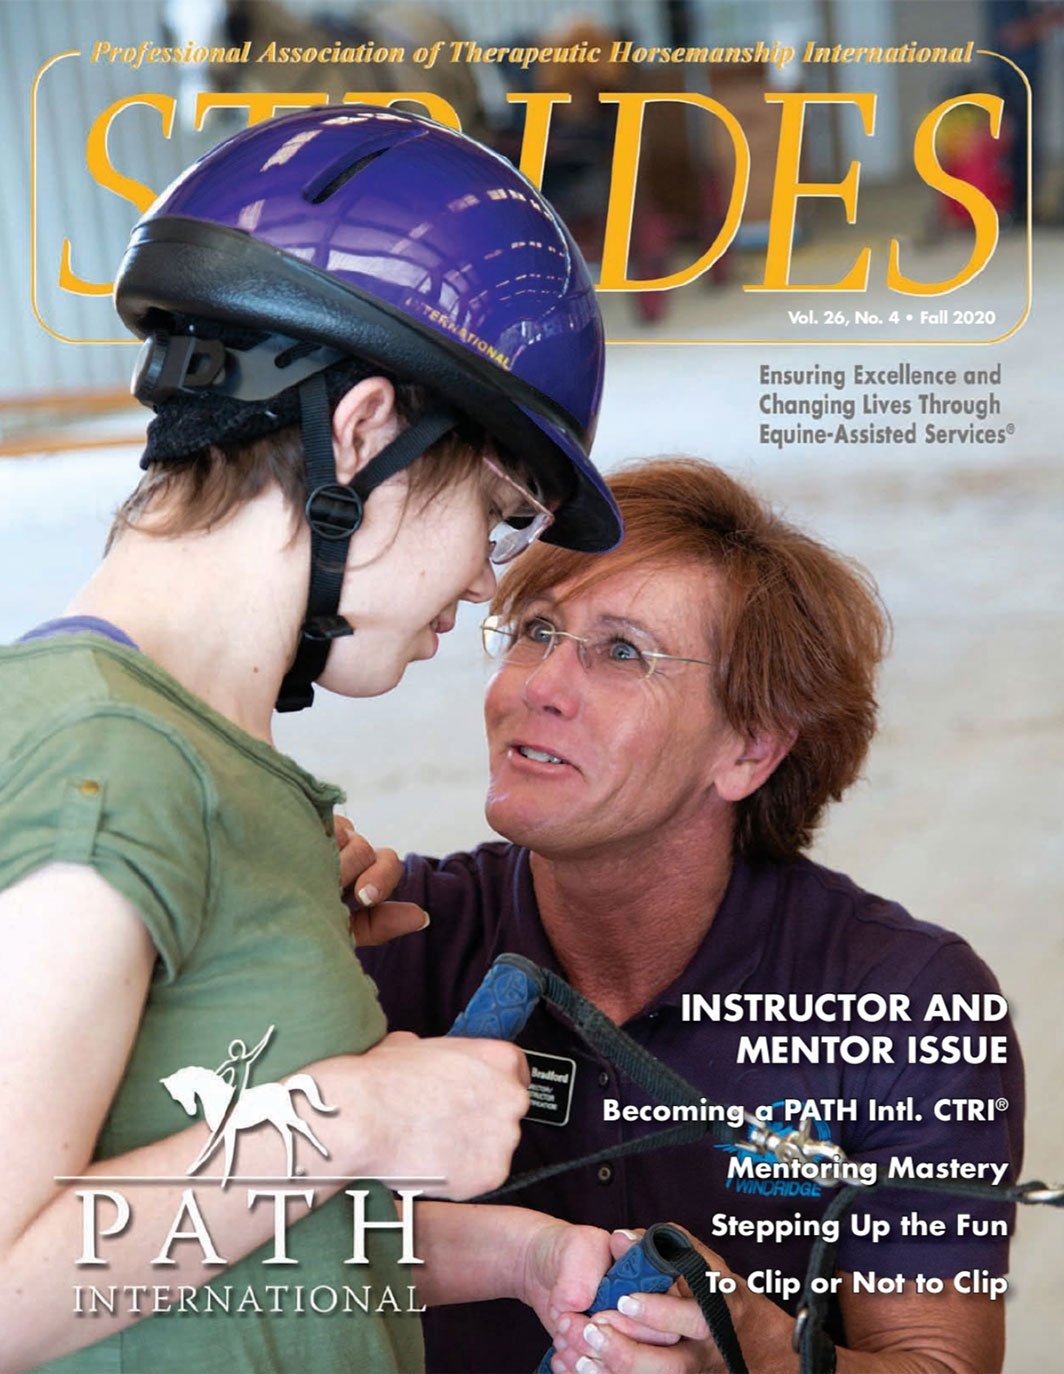 Instructor and Mentor Issue – Fall 2020